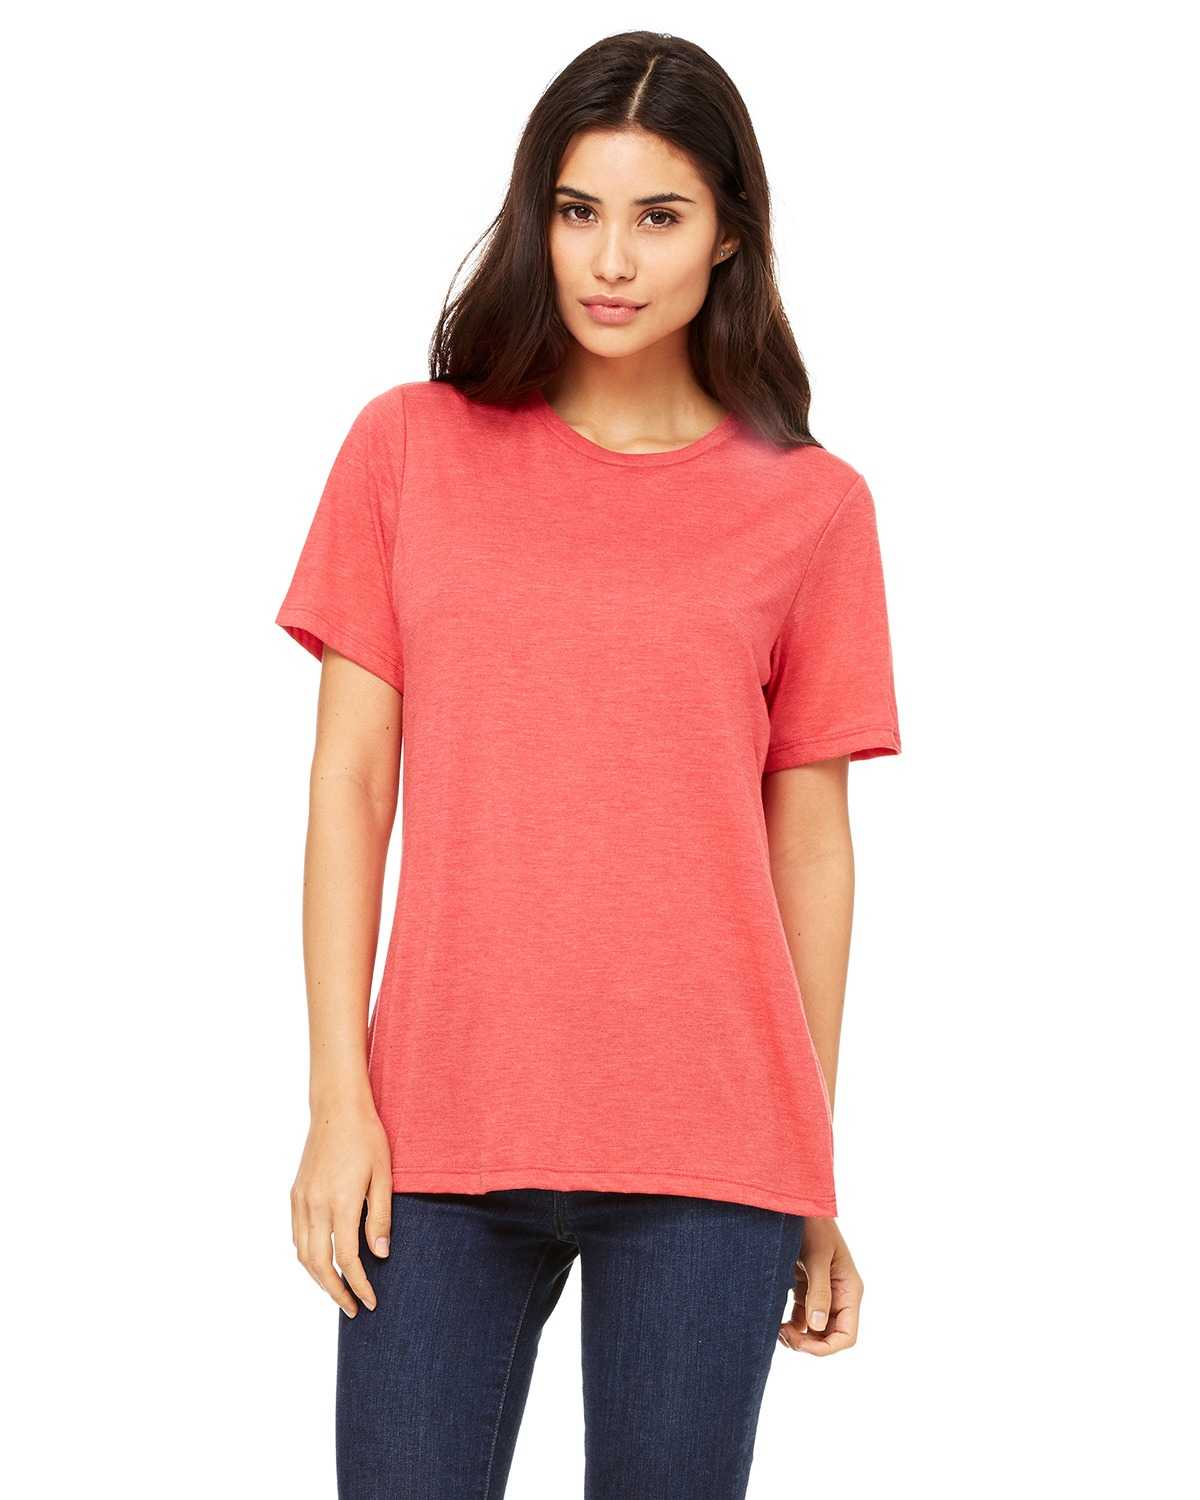 Bella + Canvas B6400 Ladies' Relaxed Jersey Short-Sleeve T-Shirt ...